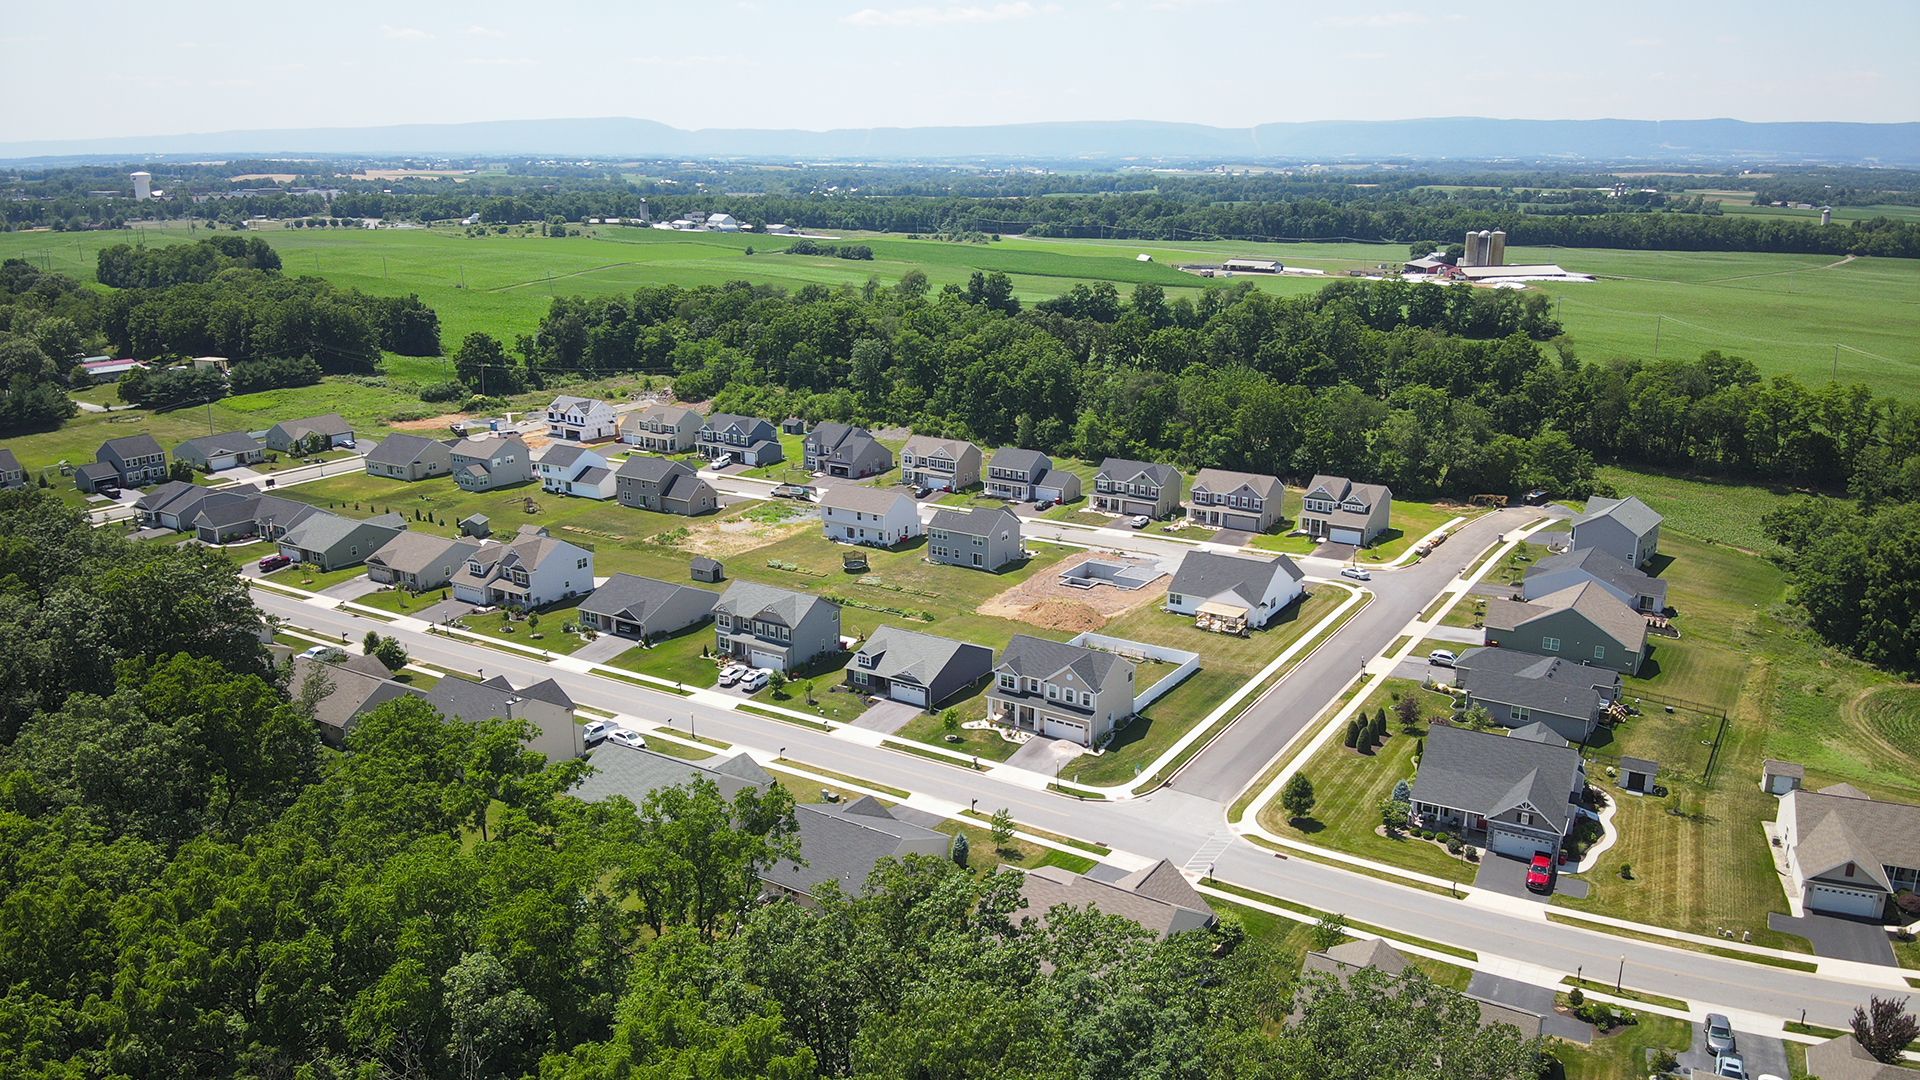 Deerfield single family homes community - surrounded by trees and mountains in the distance